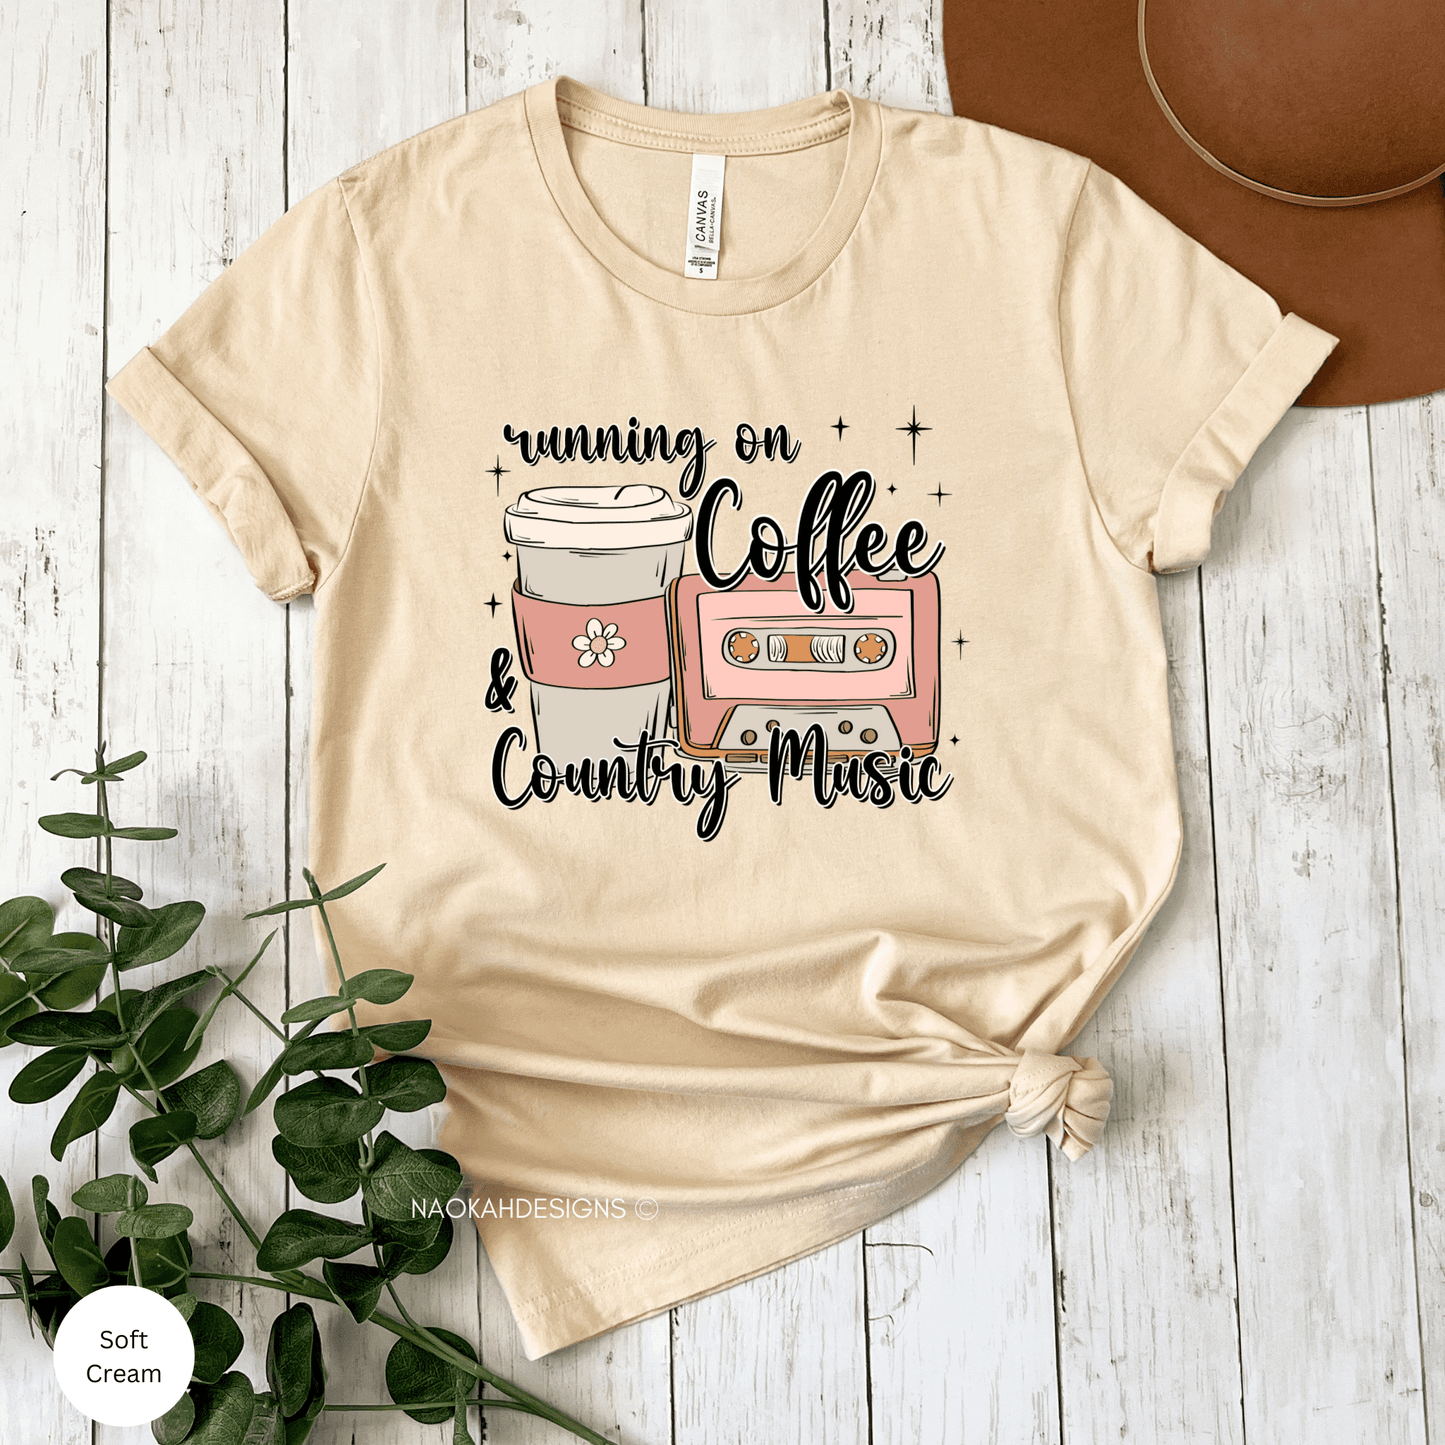 running on coffee and country music shirt, southern country shirt, cowgirl shirt, country music t-shirt, coffee tee, coffee and country music